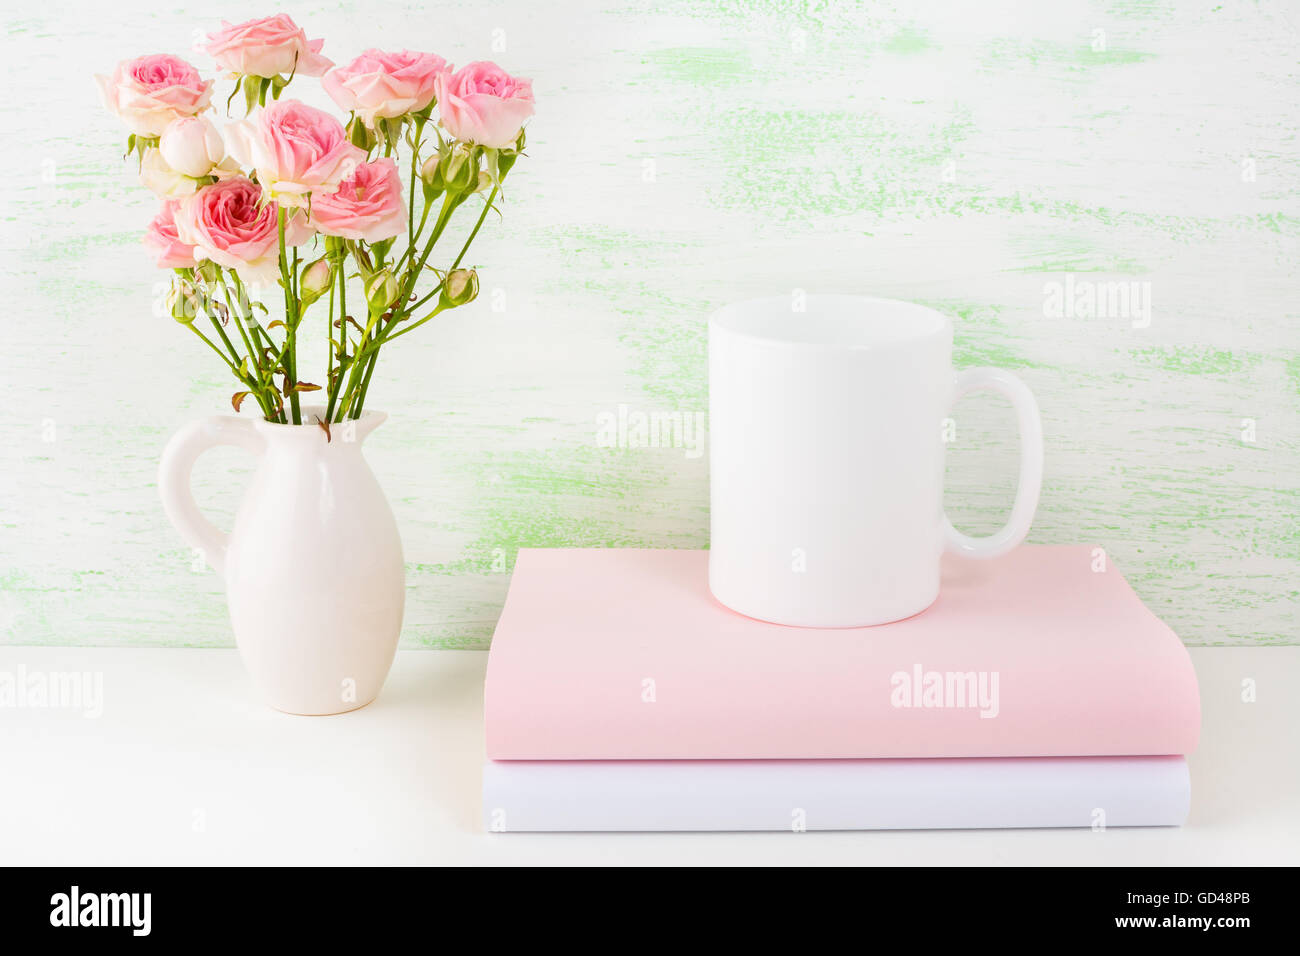 Coffee mug mockup with books and pink roses. Coffee cup mock-up for brand promotion.  Empty mug mockup for design presentation. Stock Photo